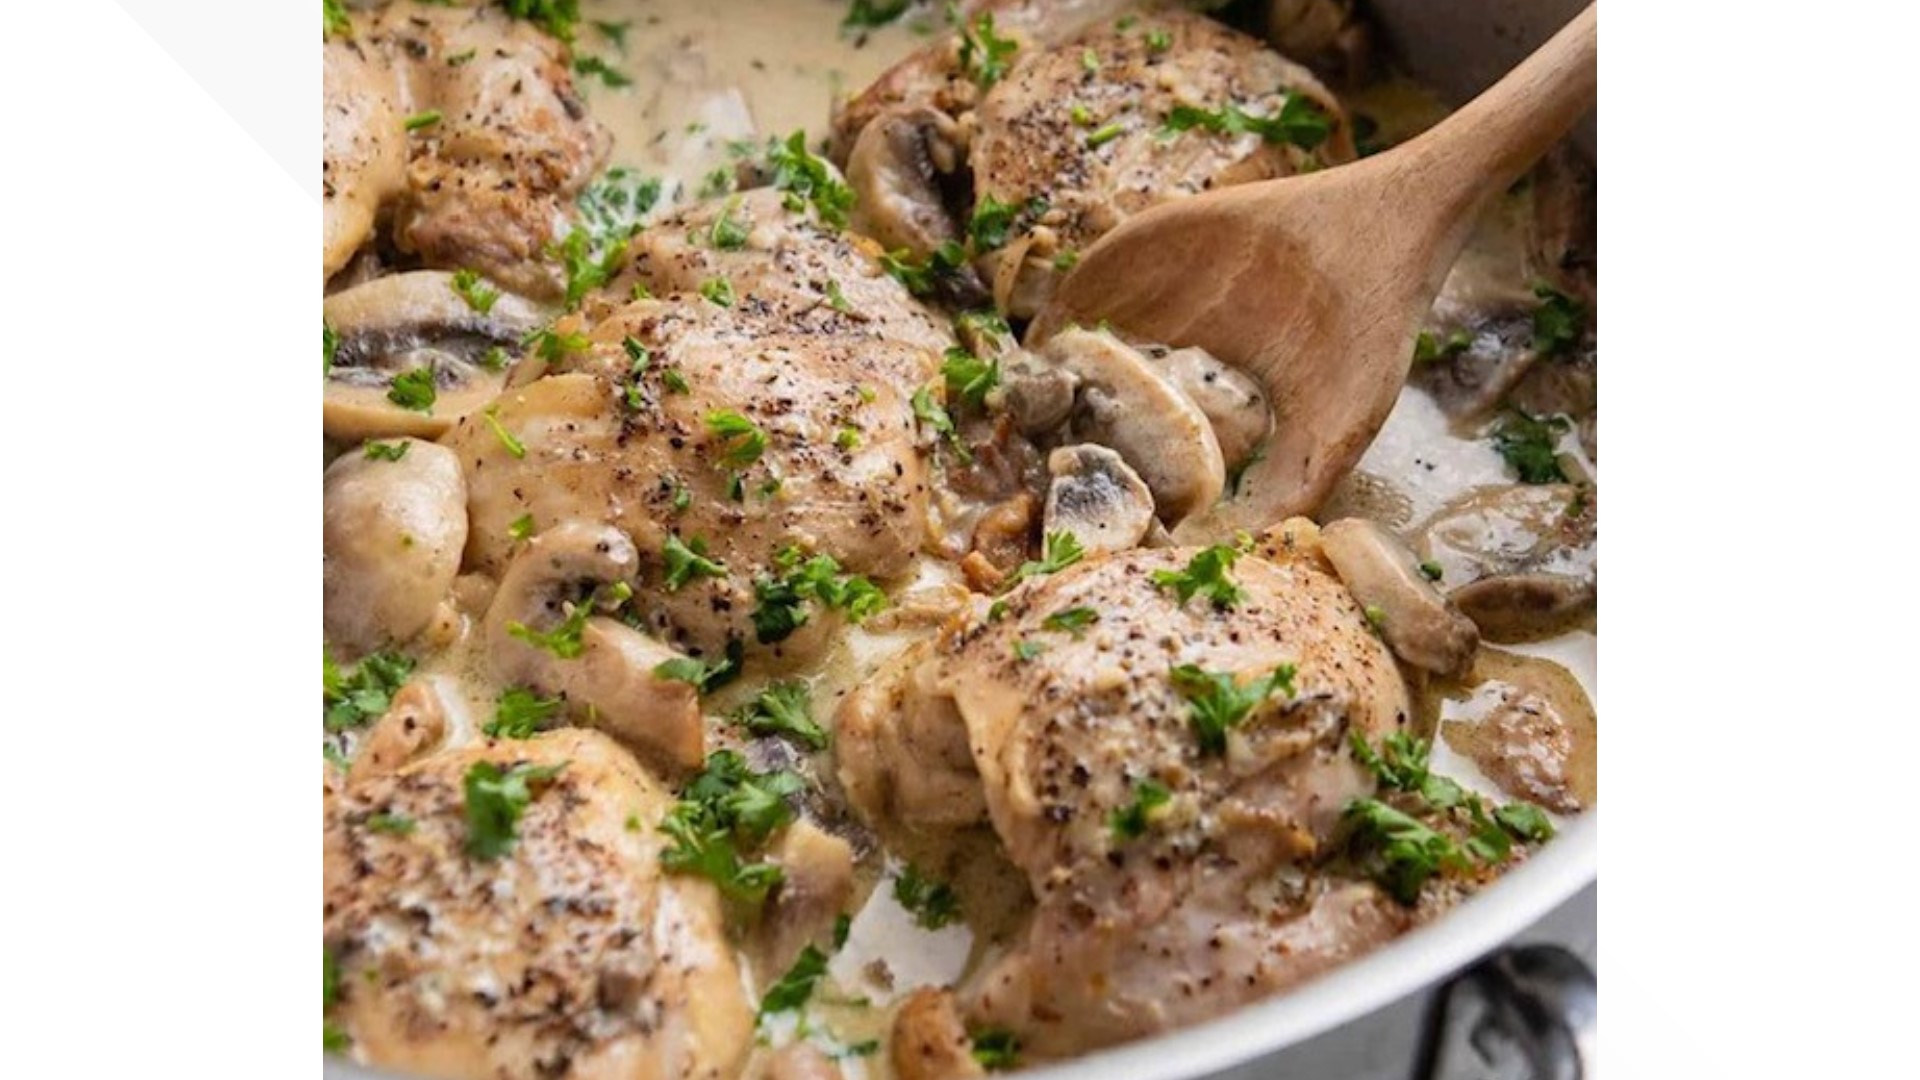 In honor of National Pinot Grigio day, Chef Belton makes a Pinot Grigio Chicken with Mushrooms